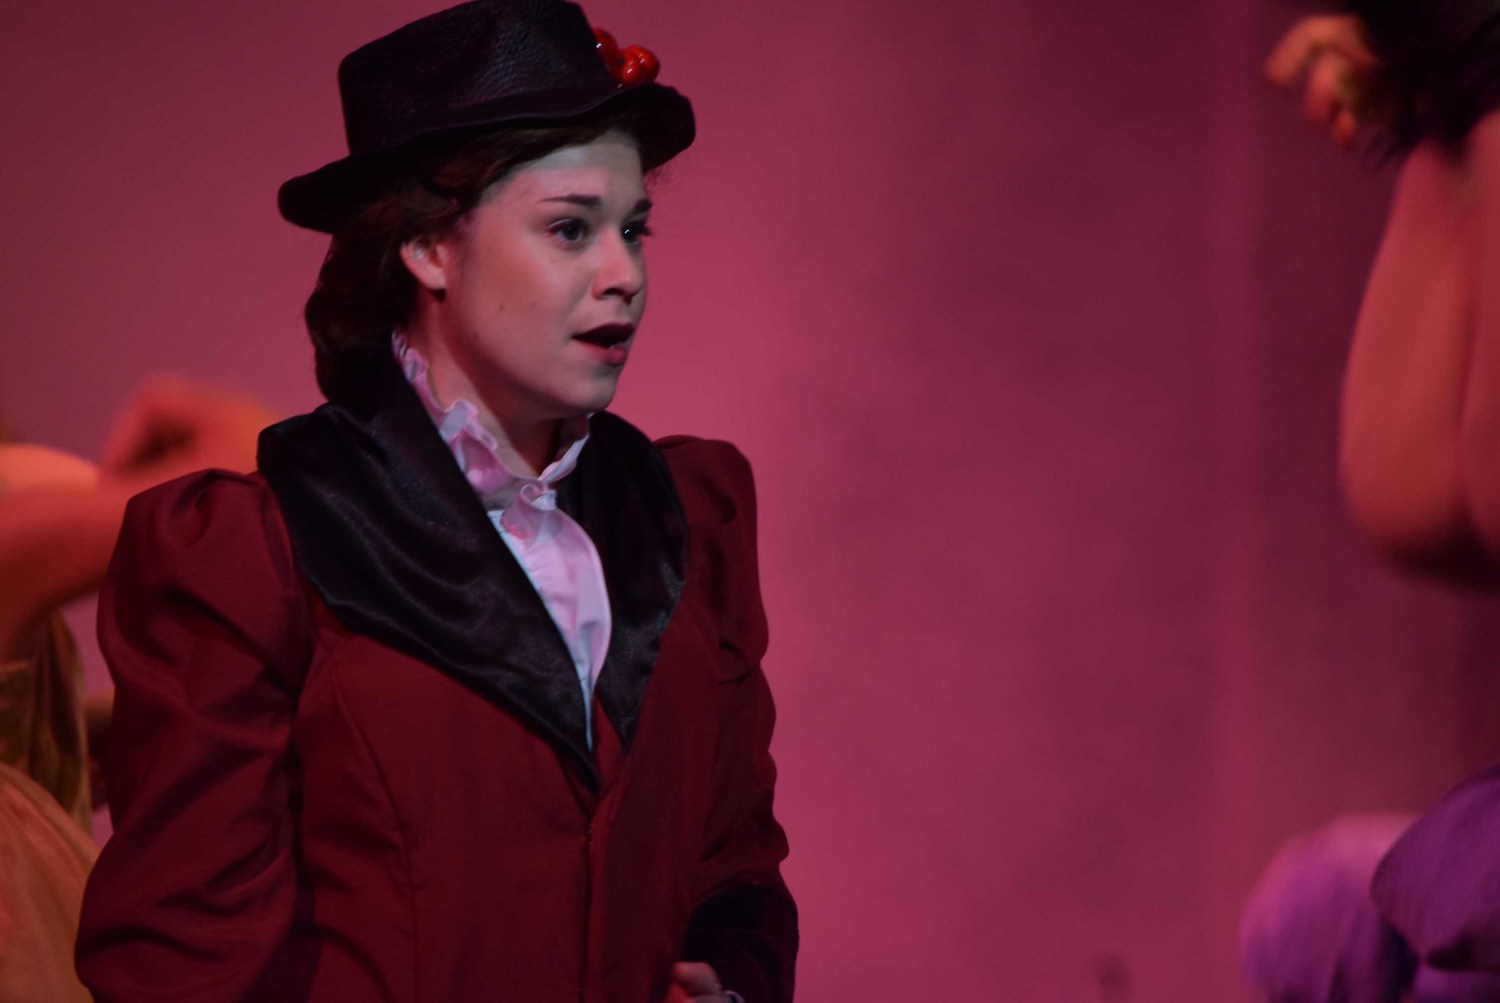 Enclosed are production photos from the CSC production of Mary Poppins. 1